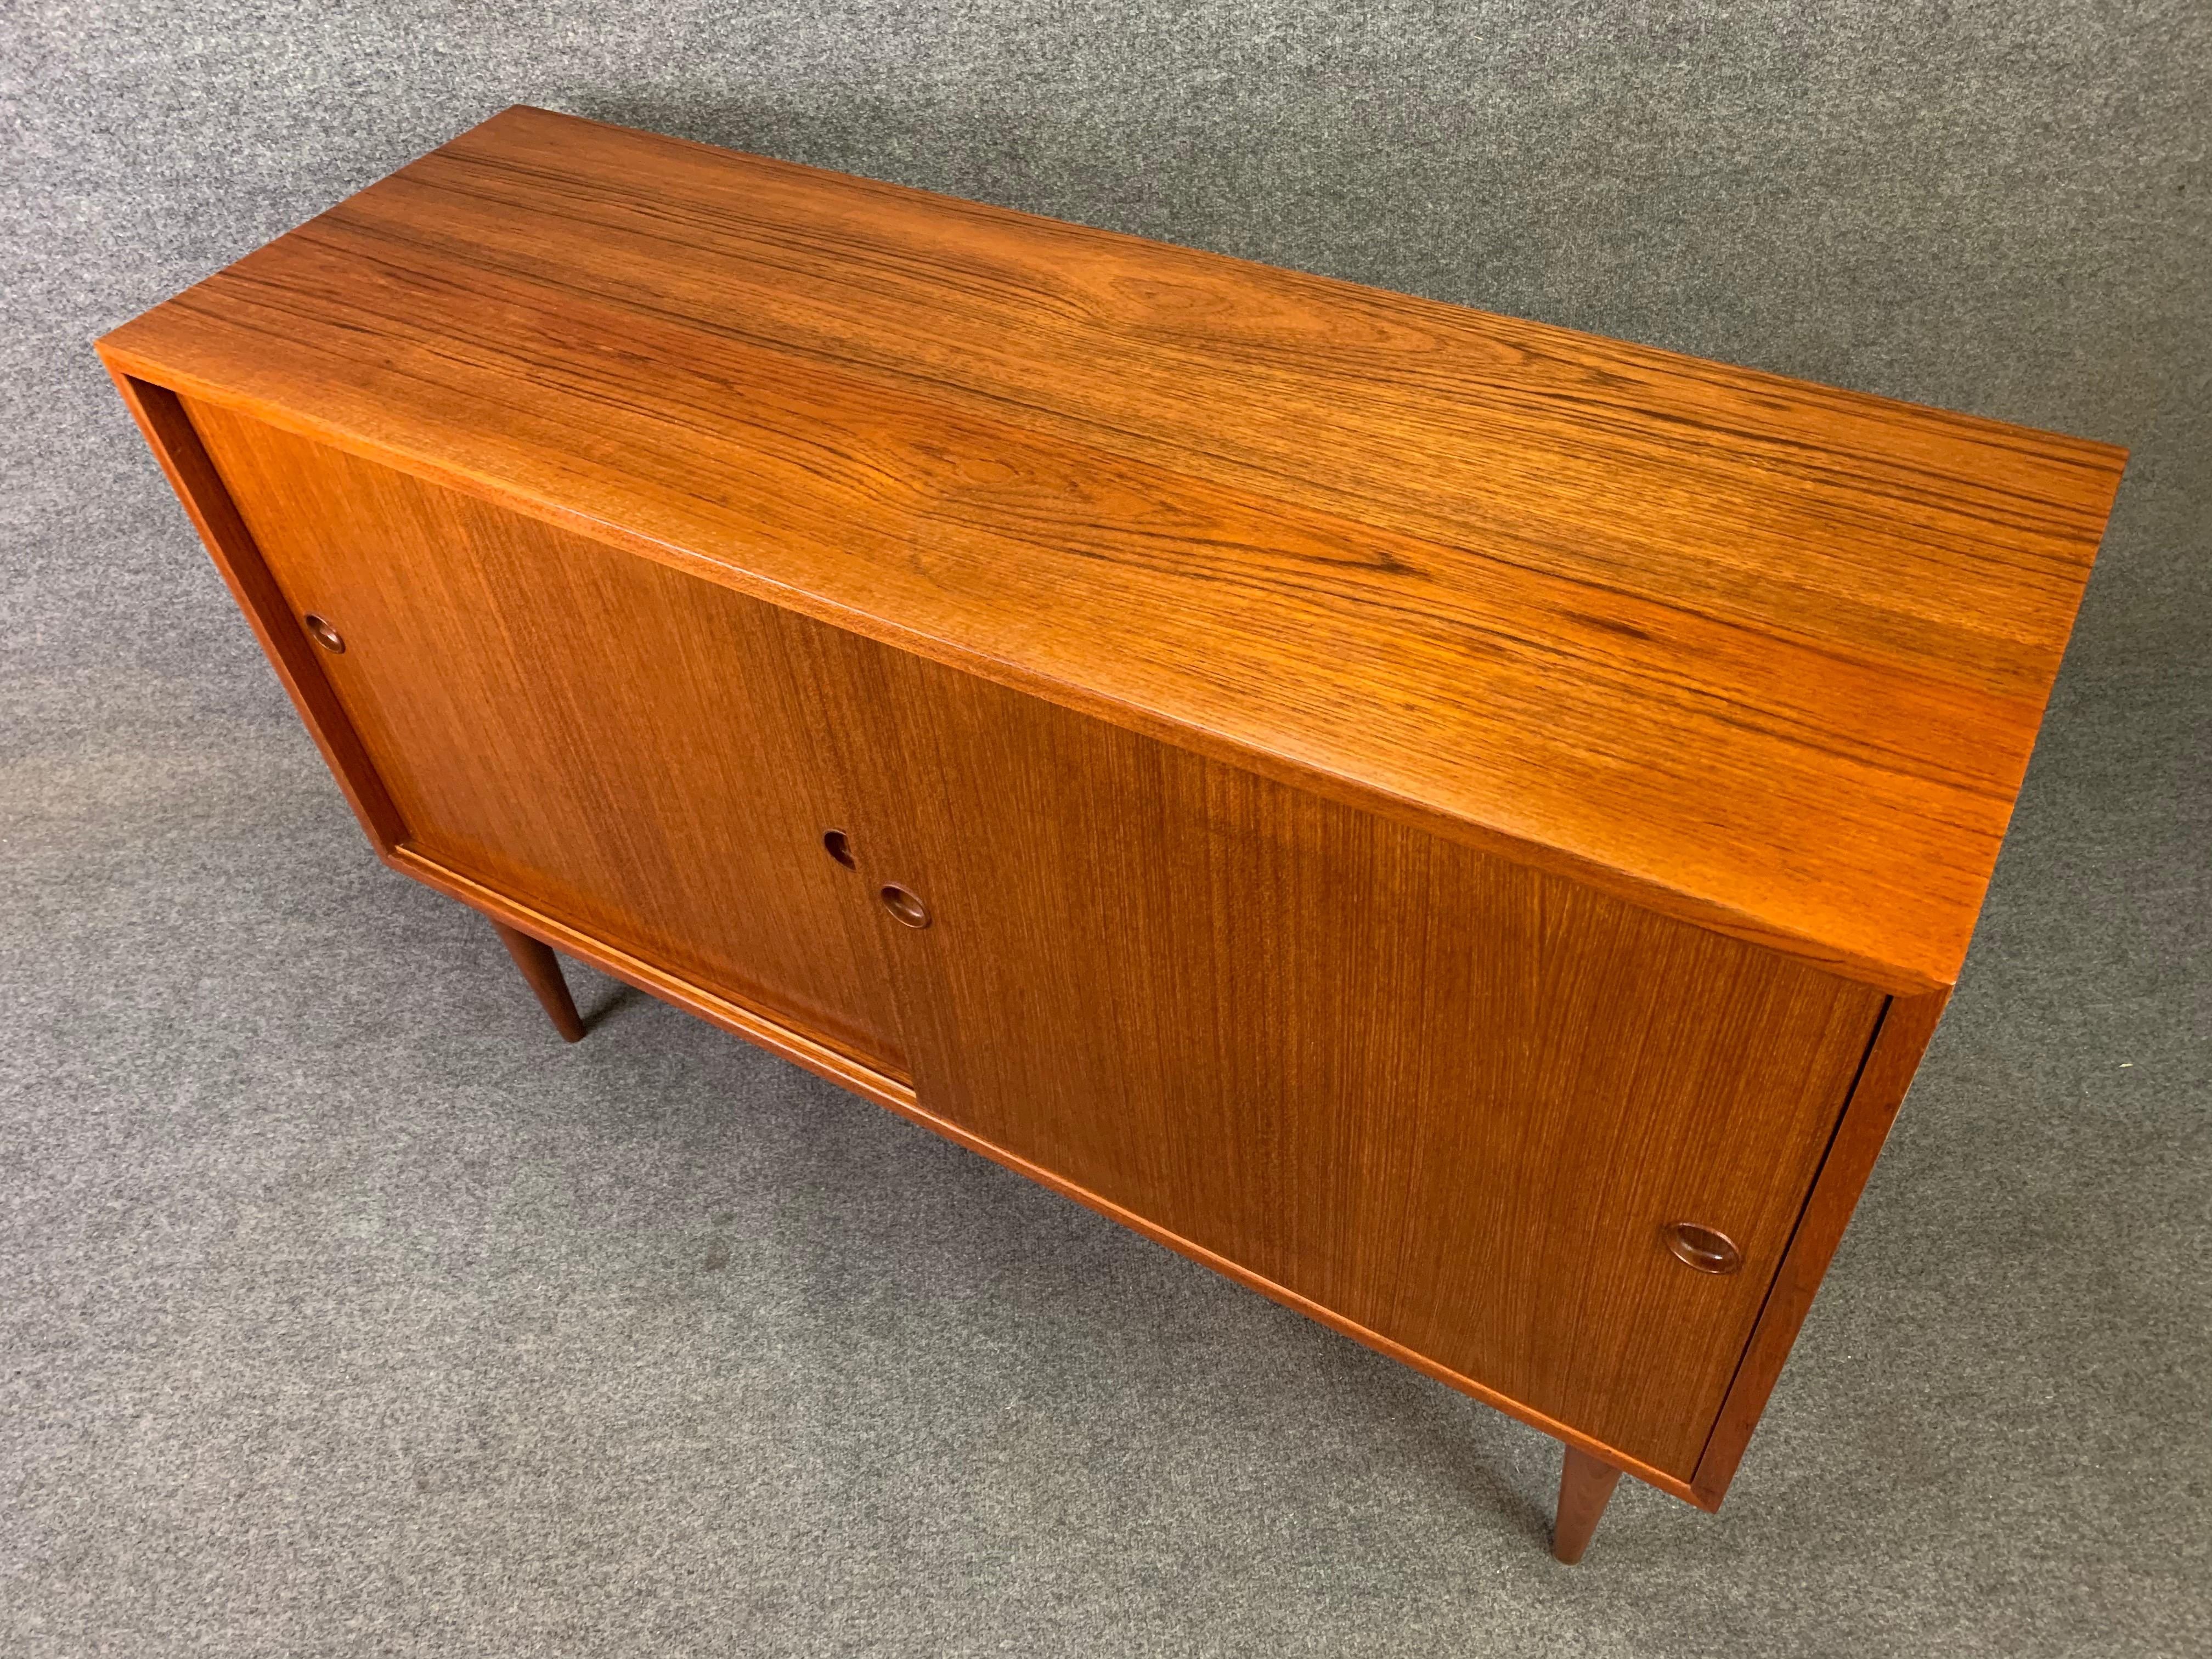 Here is a beautiful Scandinavian Modern compact sideboard in teak designed by master Børge Mogensen and manufactured by Karl Andersson & Söner in Denmark in the 1960s.
This case piece, recently imported from Copenhagen to California before its